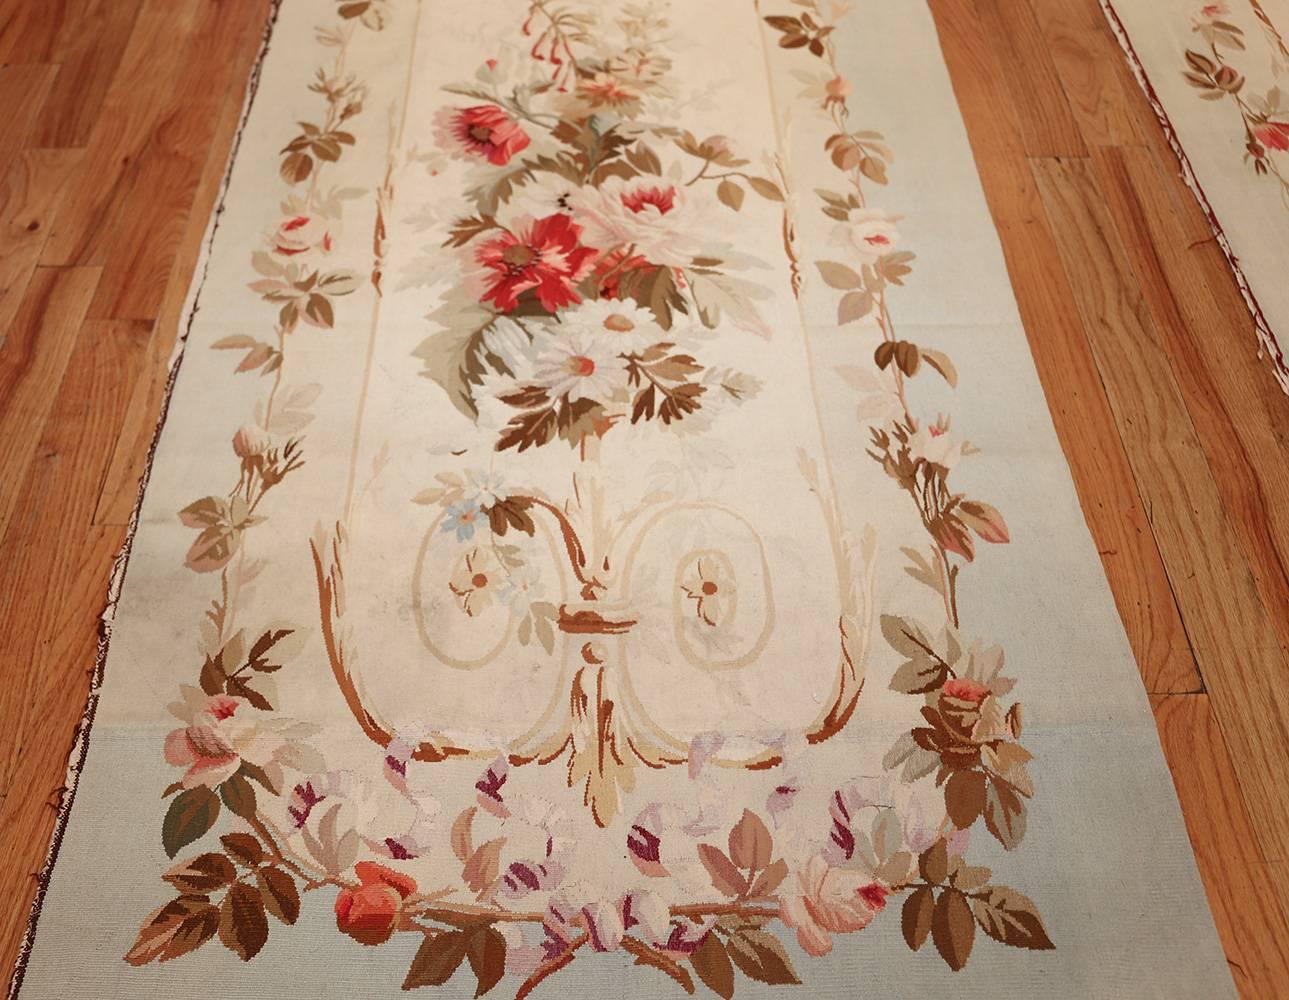 Pair of Antique French Aubusson Rugs. Size: 3 ft 2 in x 10 ft 9 in Each 4